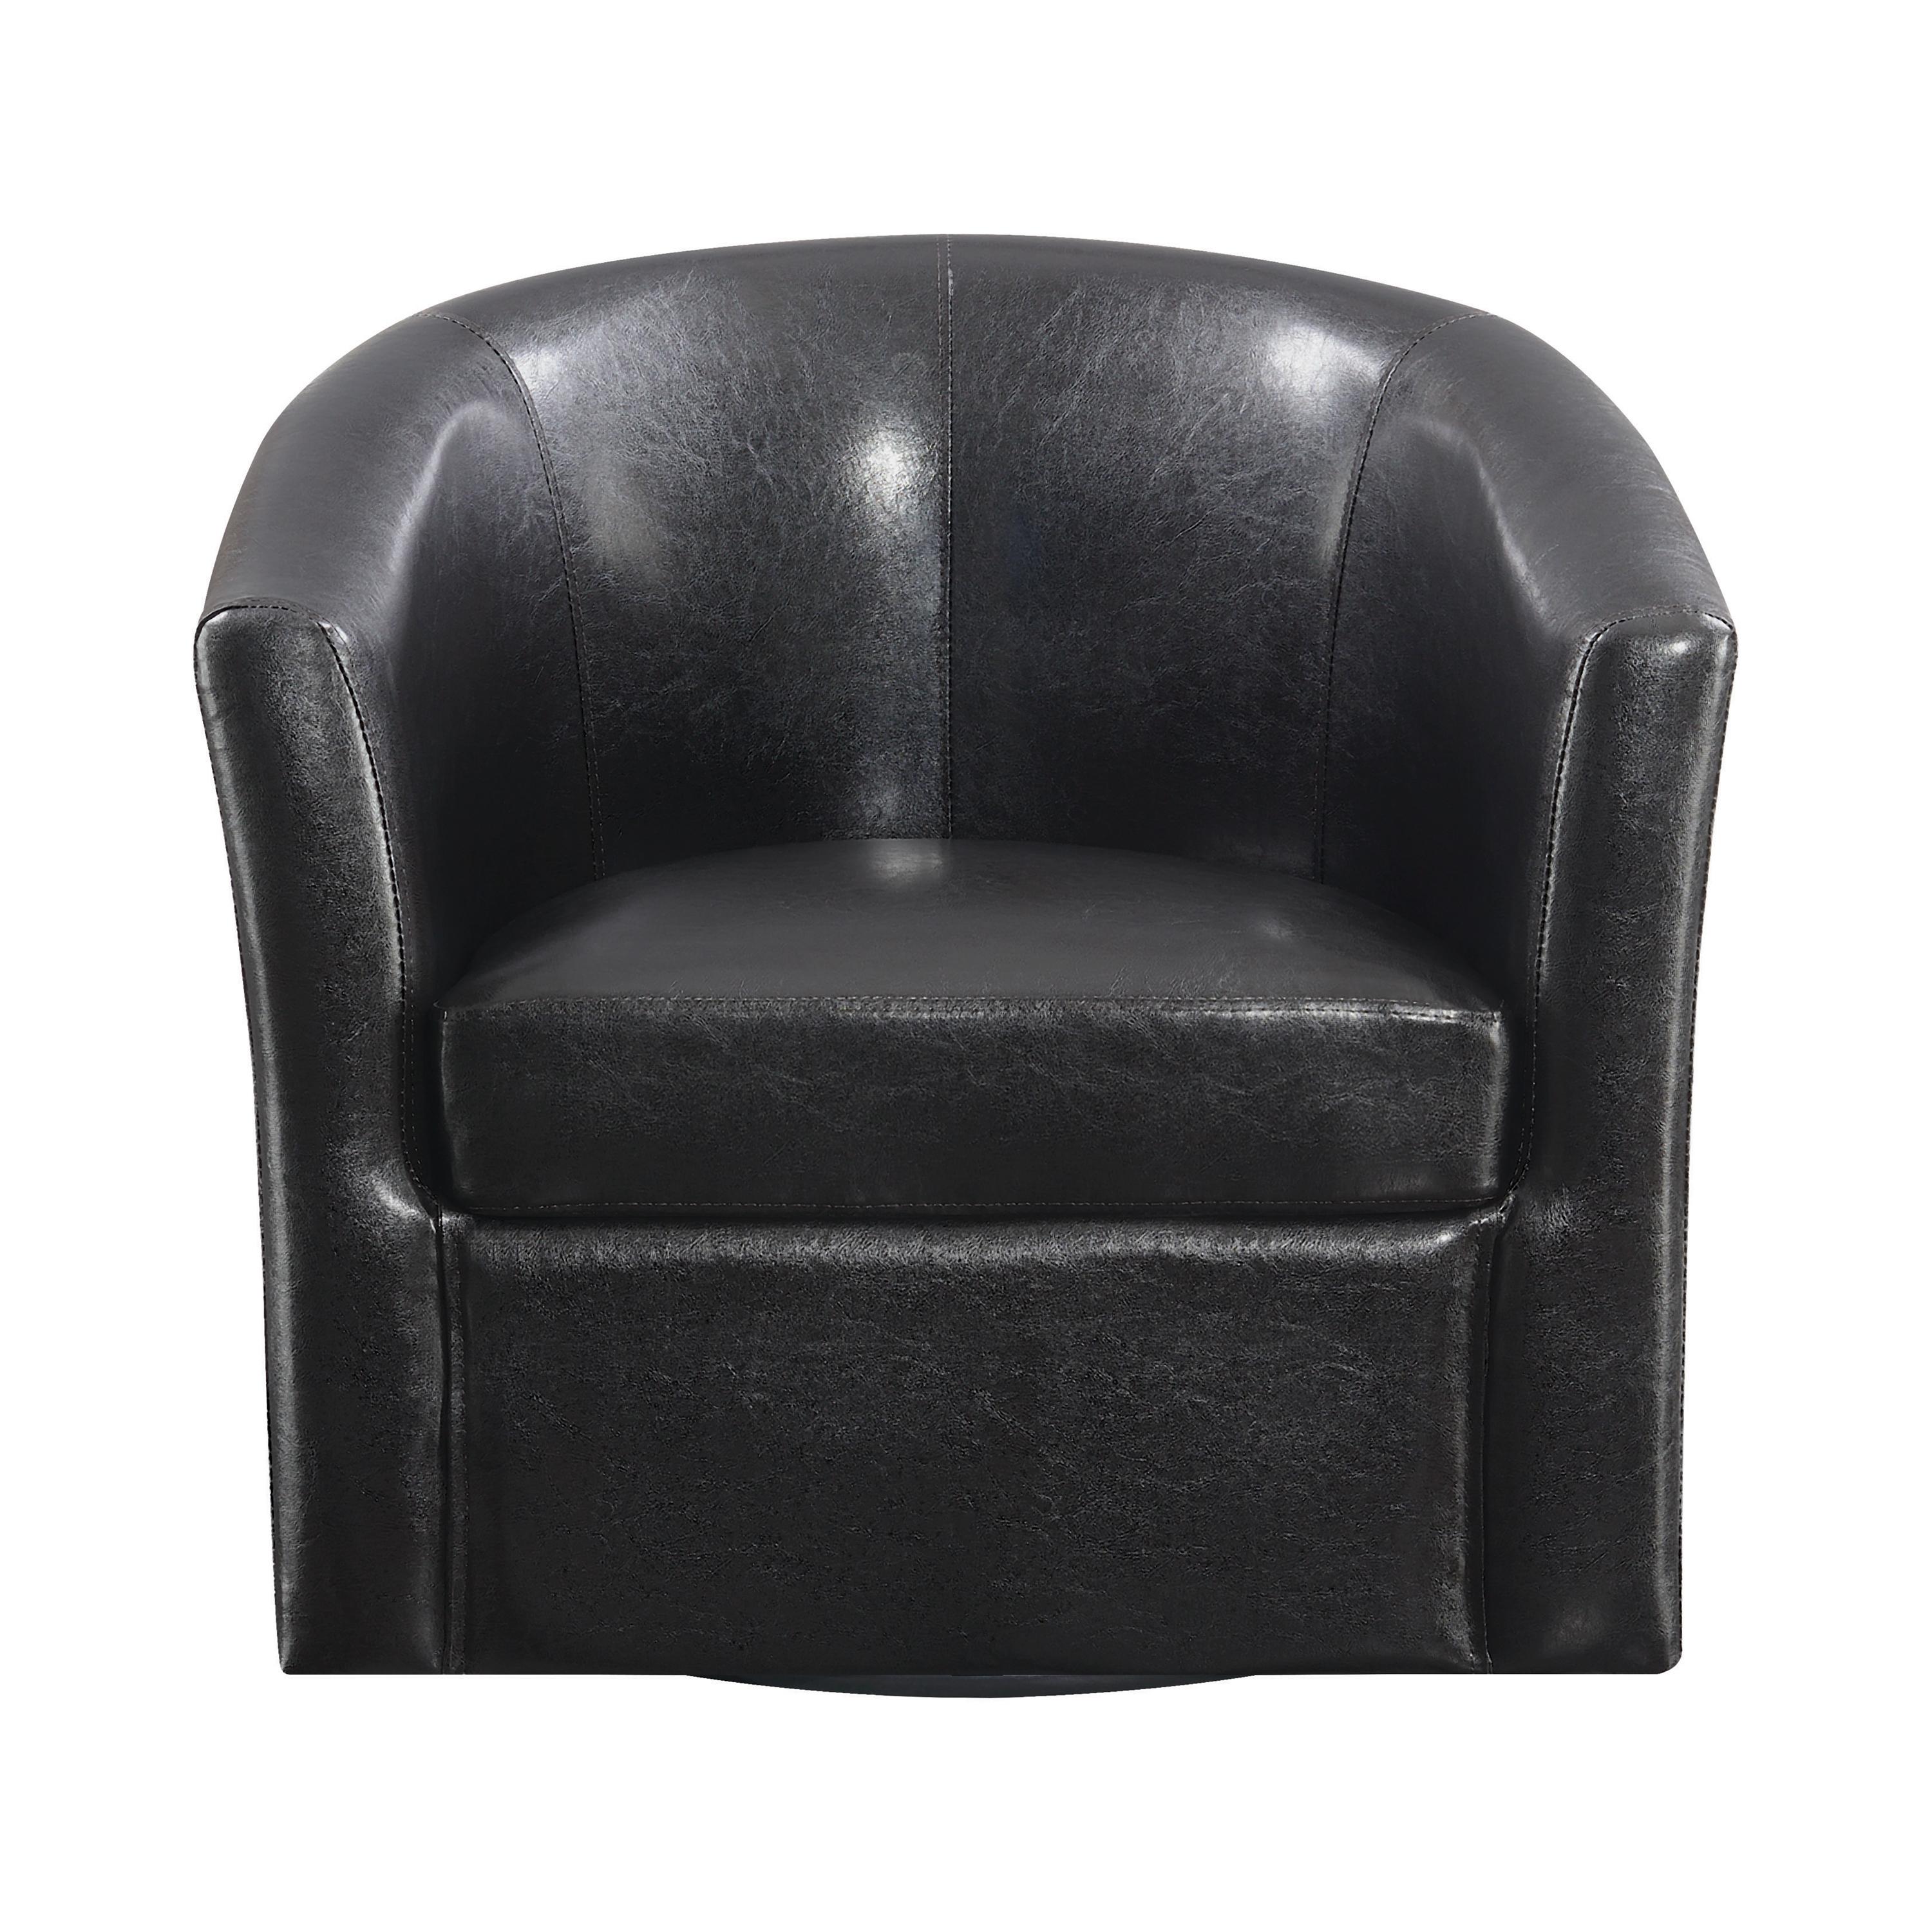 Transitional Accent Chair 902098 902098 in Dark Brown Leatherette